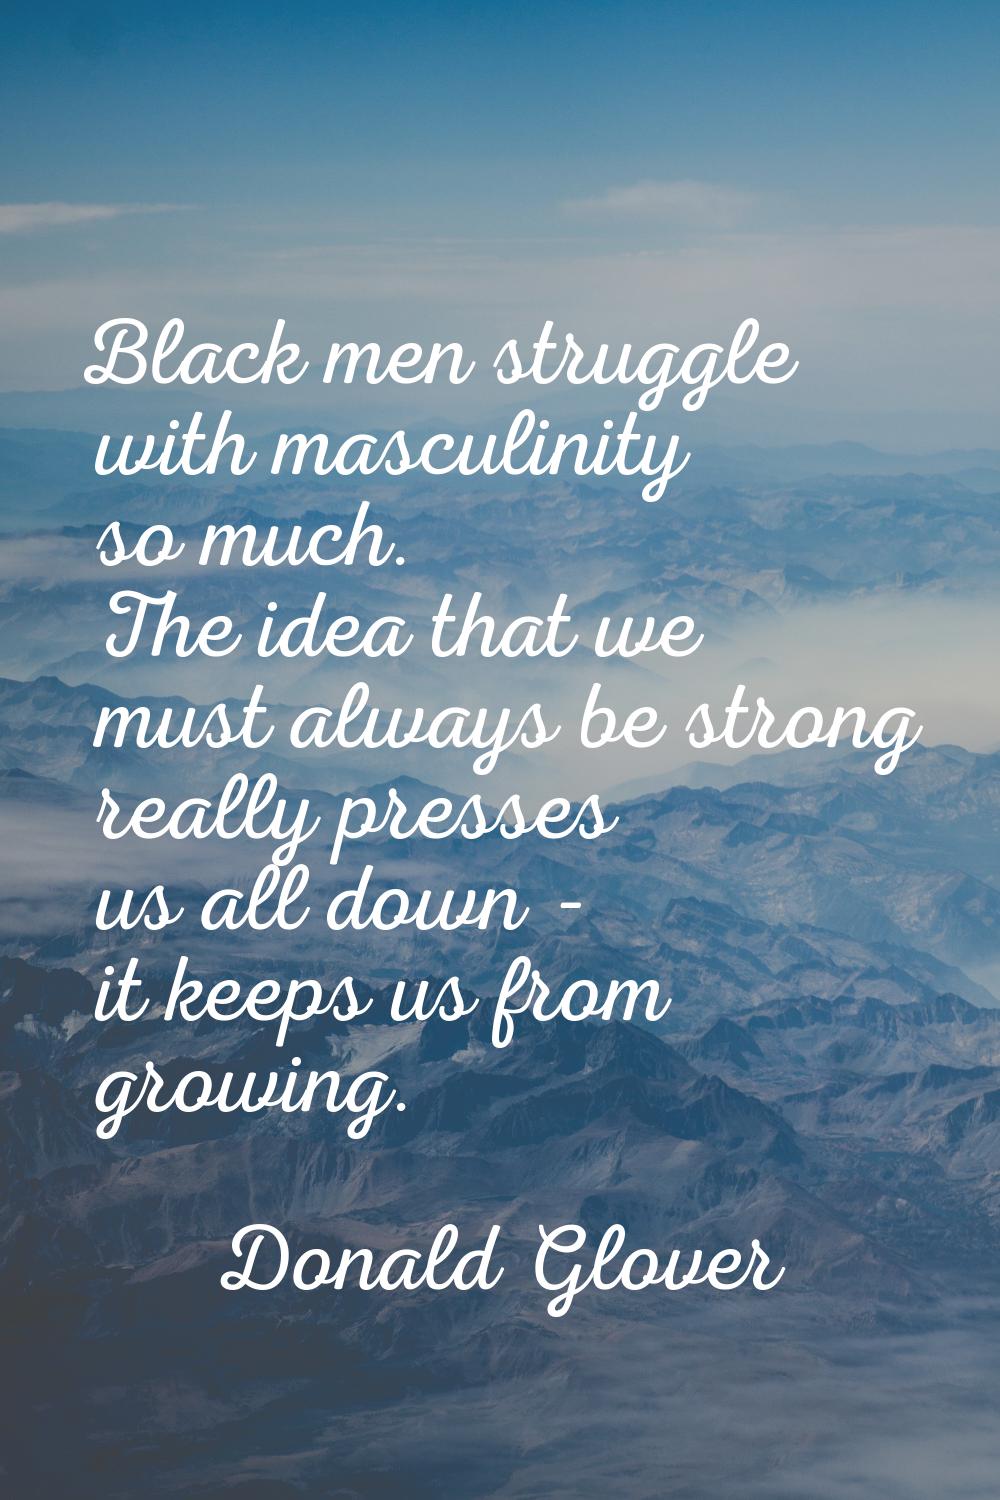 Black men struggle with masculinity so much. The idea that we must always be strong really presses 